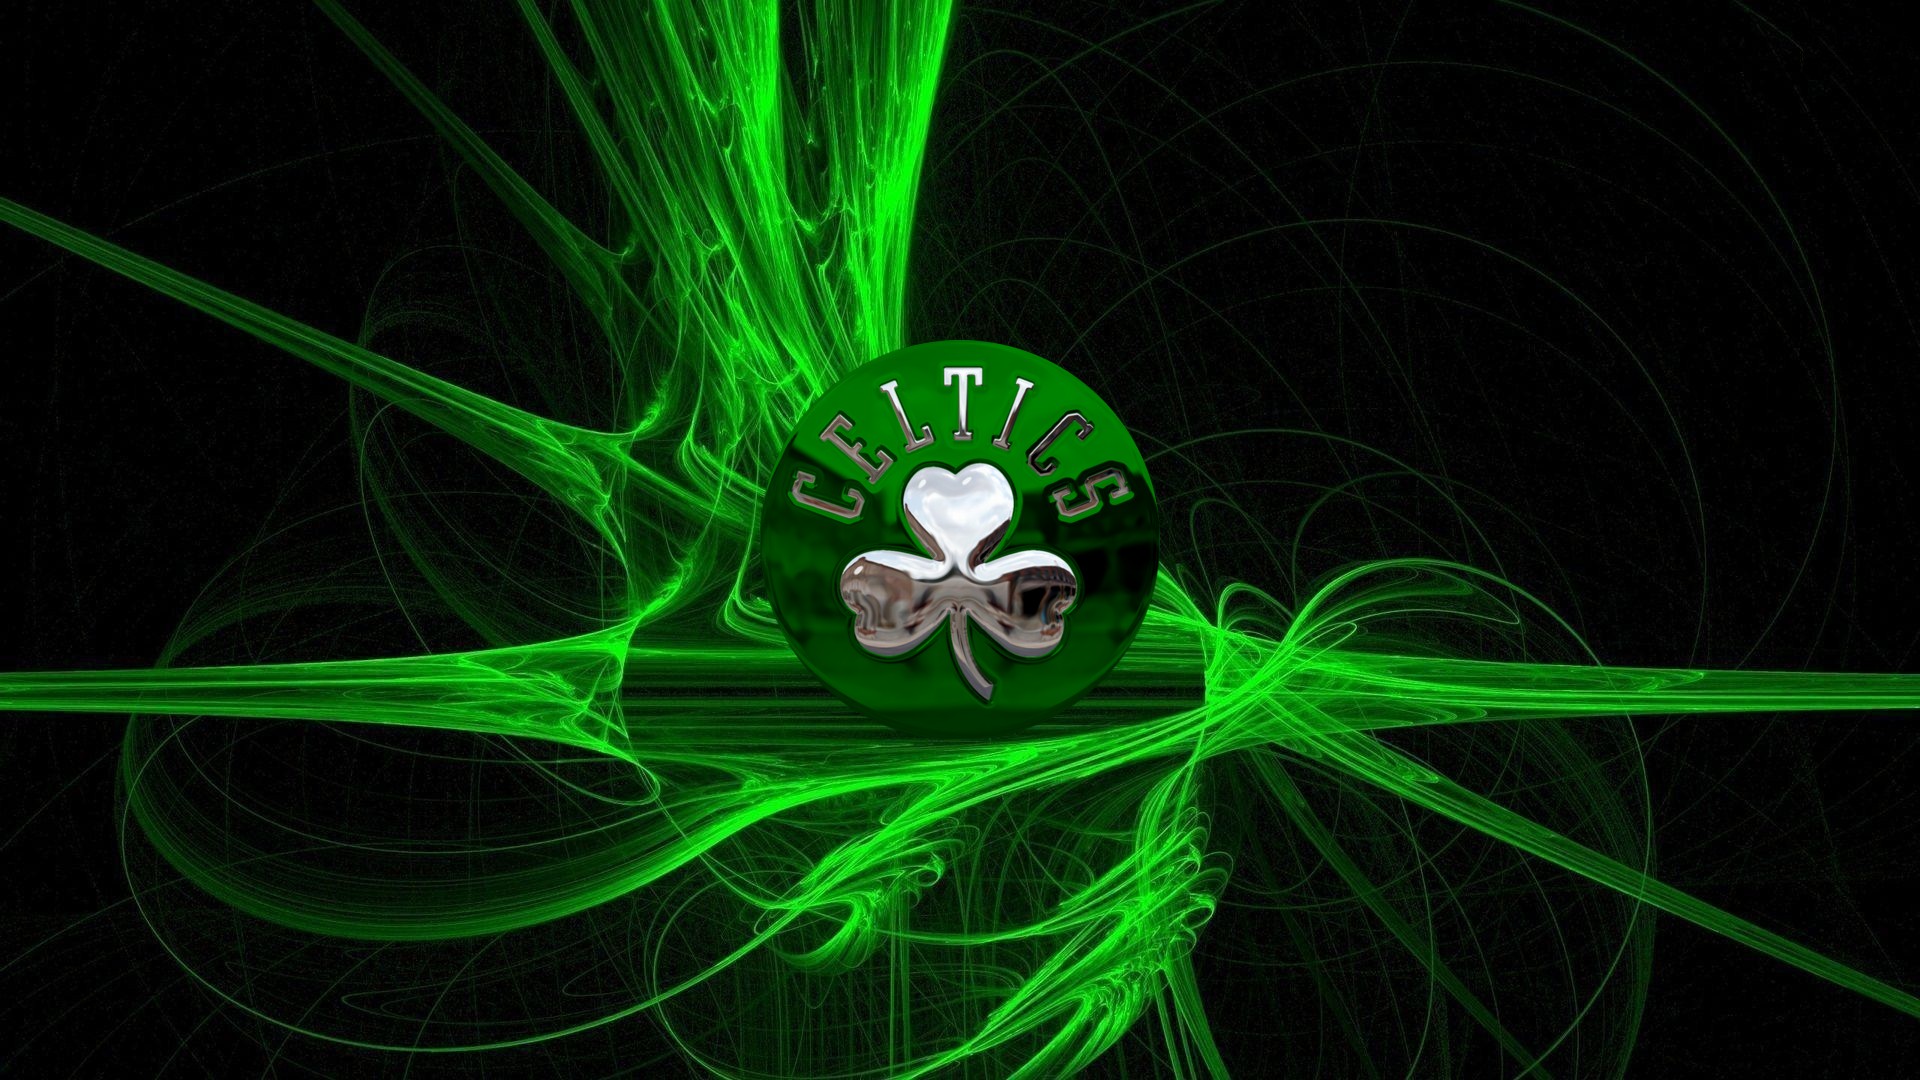 Wallpaper Hd Boston Celtics Logo With Image Resolution - Abstract Neon Green Background - HD Wallpaper 